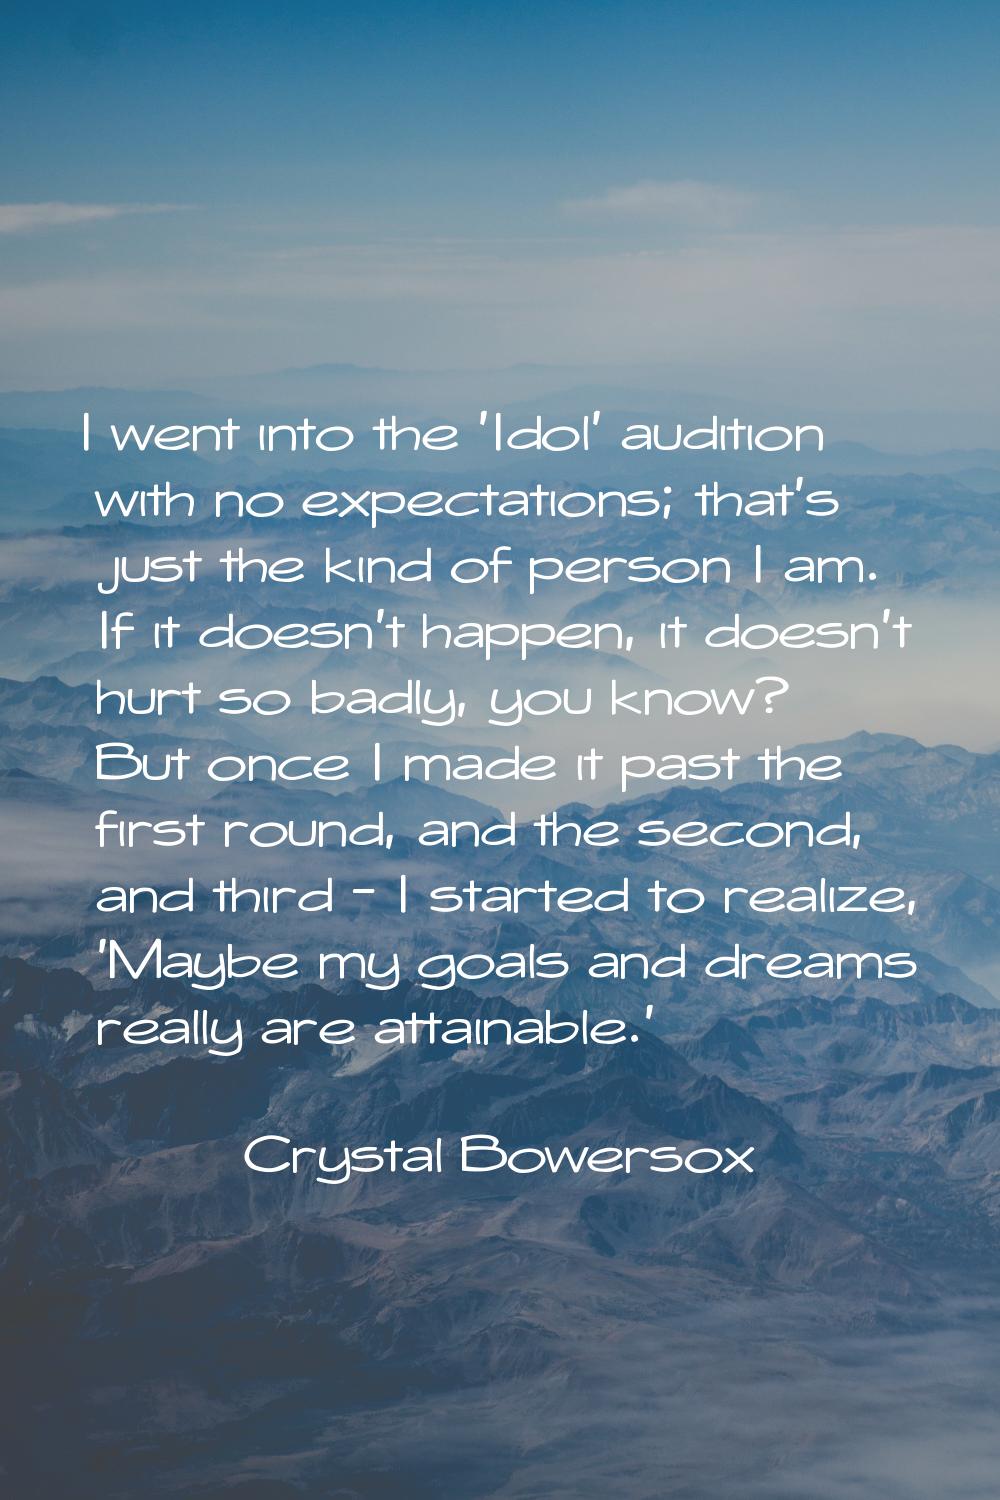 I went into the 'Idol' audition with no expectations; that's just the kind of person I am. If it do